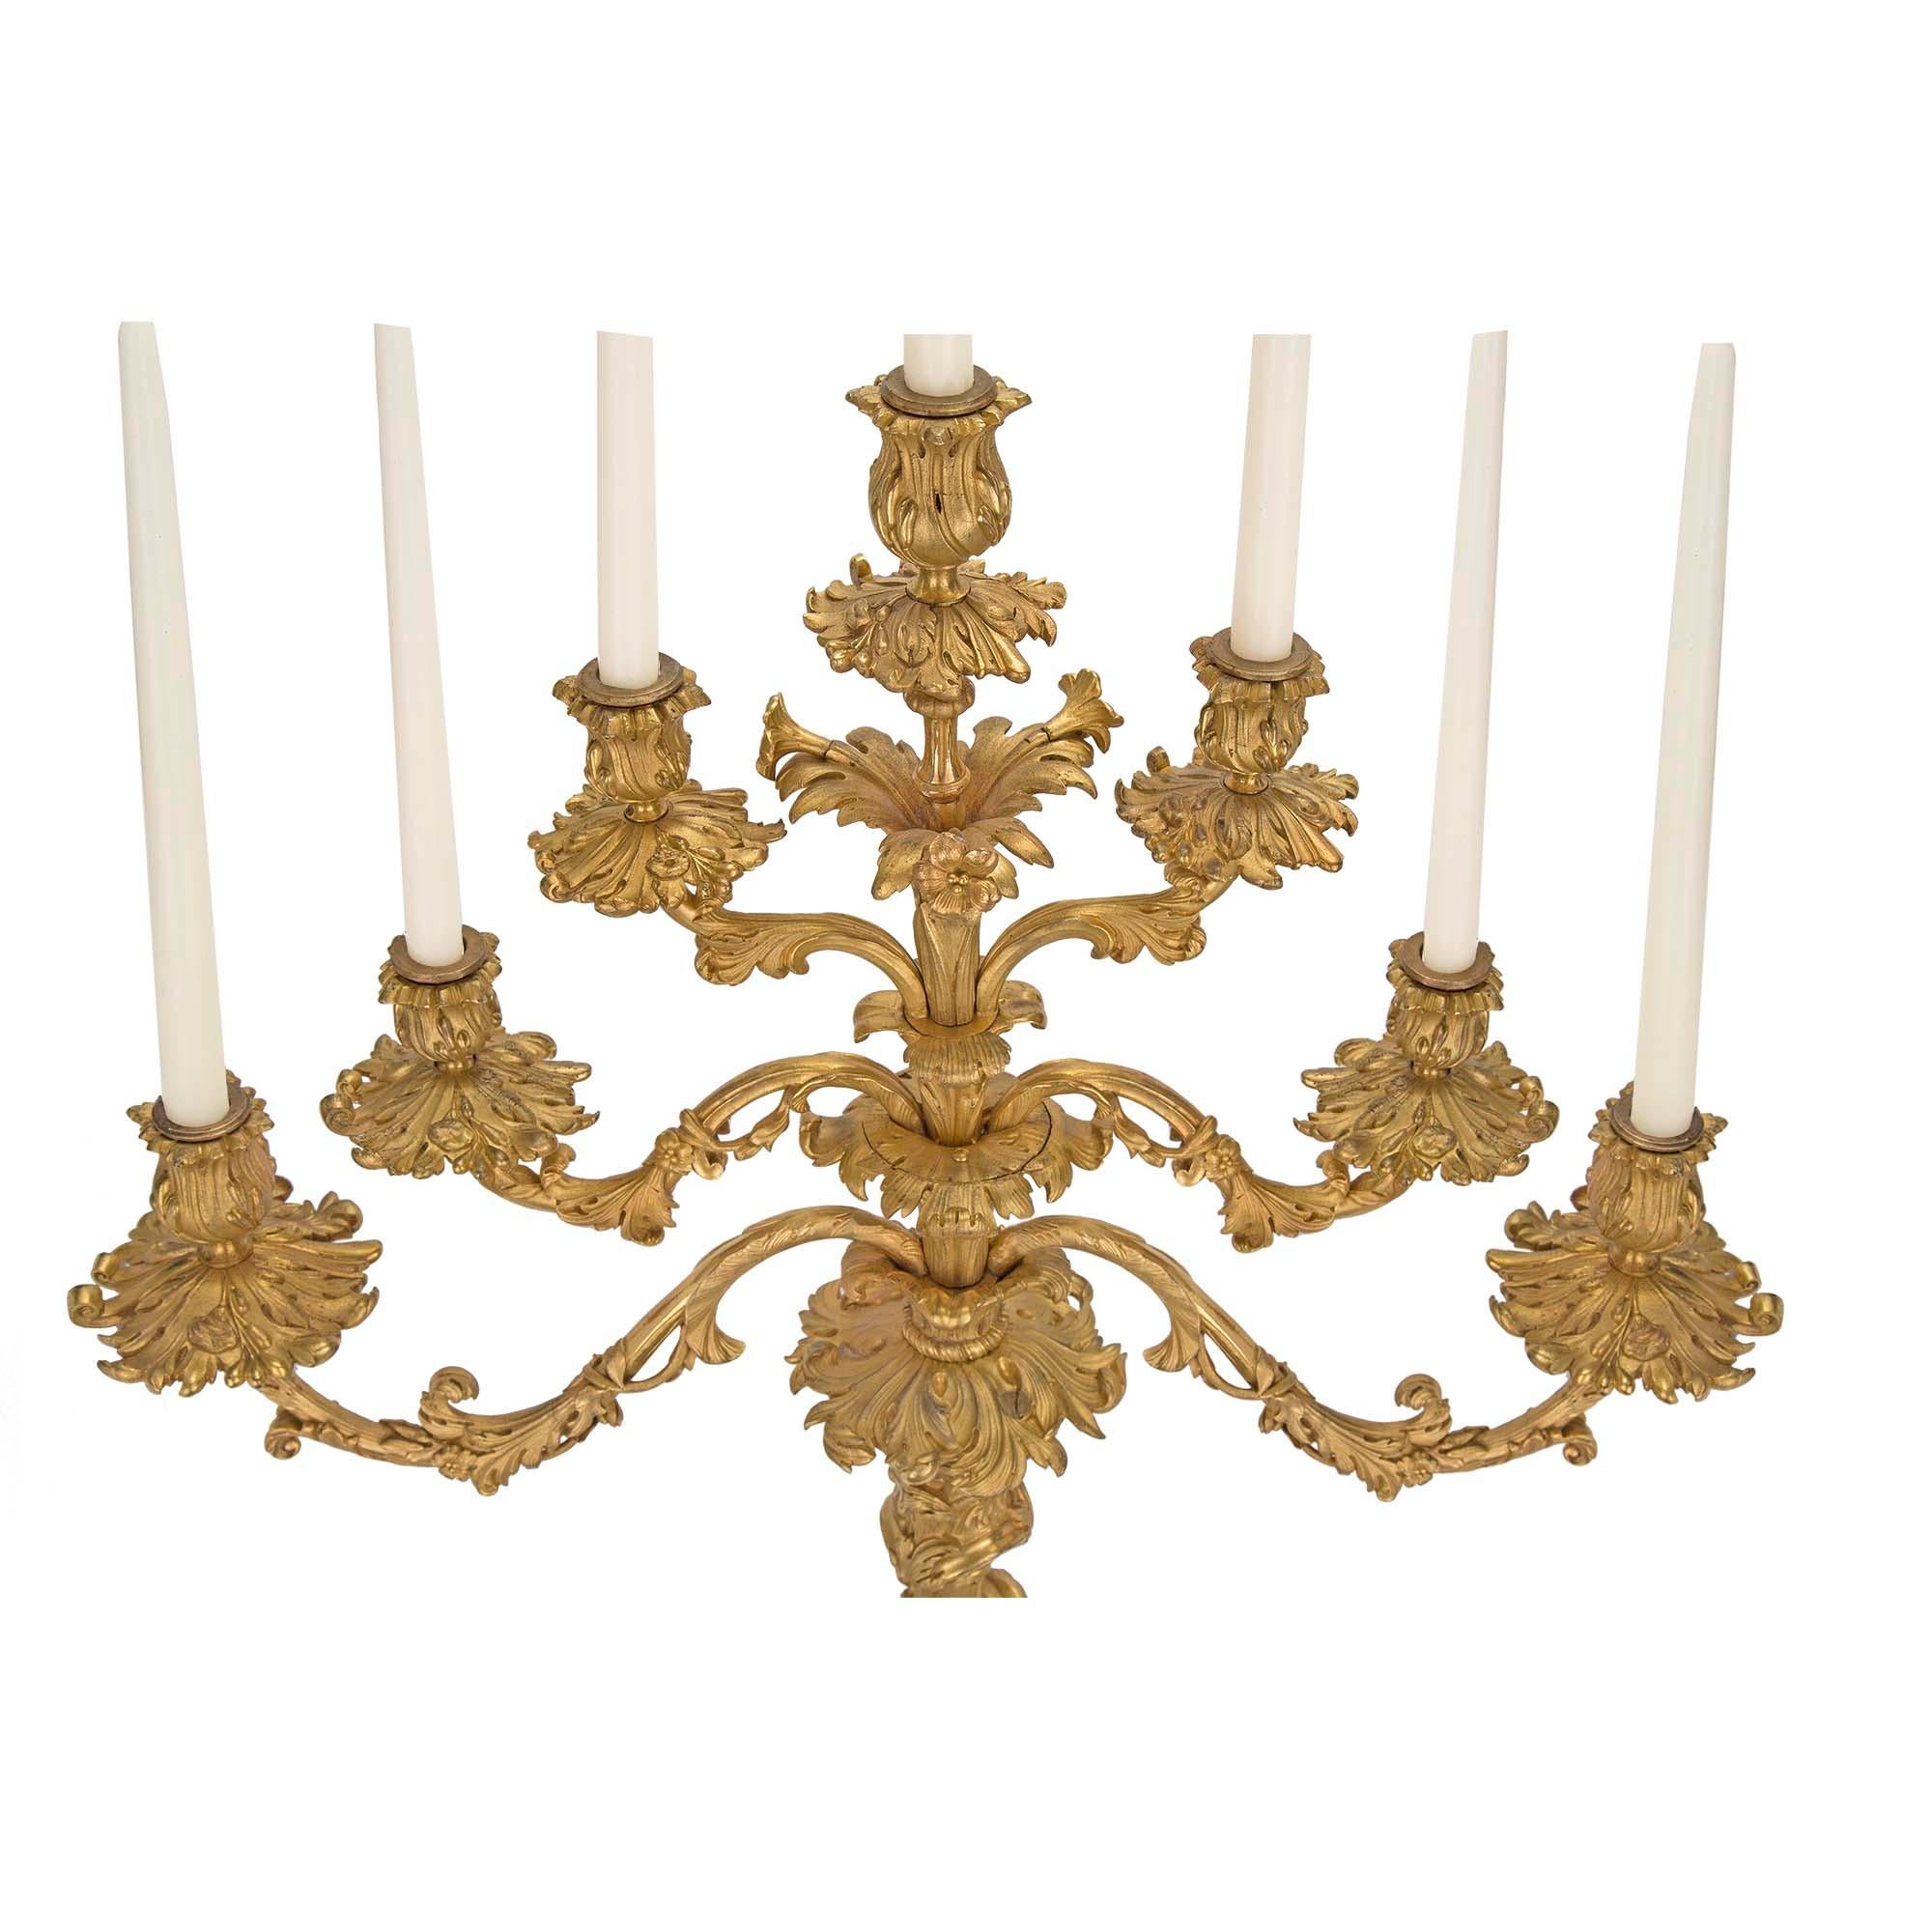 Pair of French Early 18th Century Régence Period Ormolu Candelabras For Sale 1